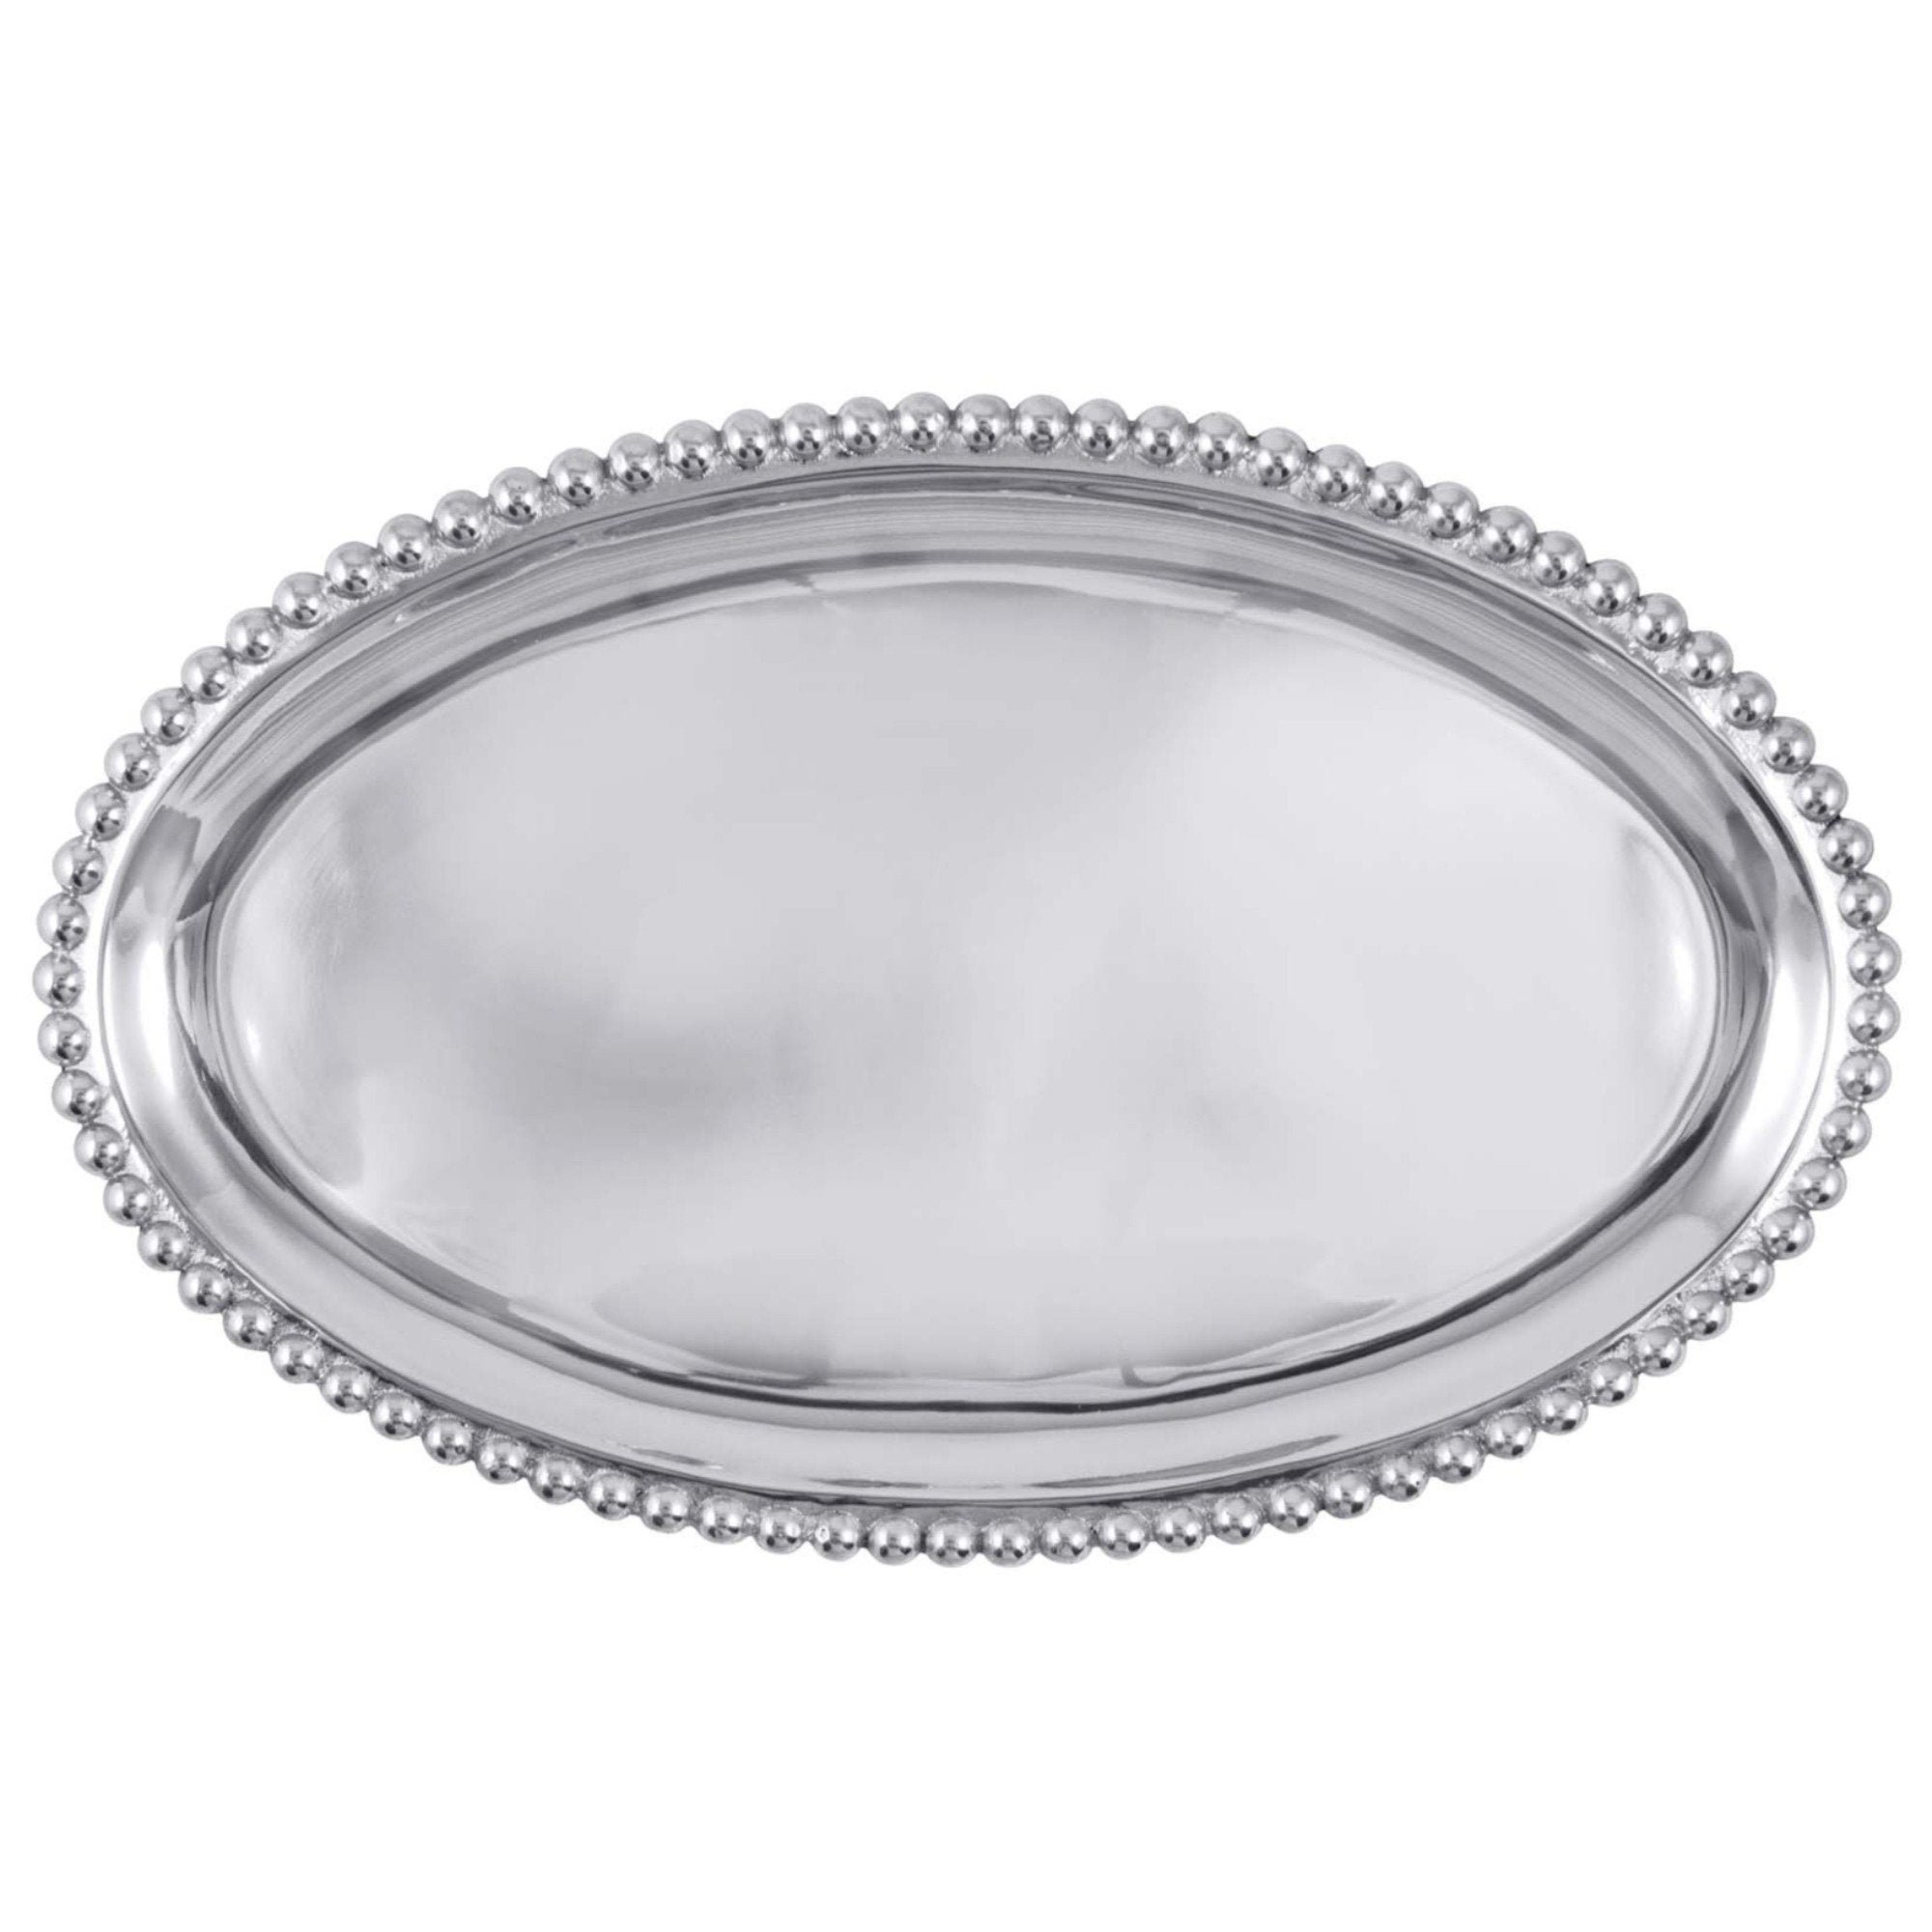 23455 - String of Pearls Oval Platter - $110